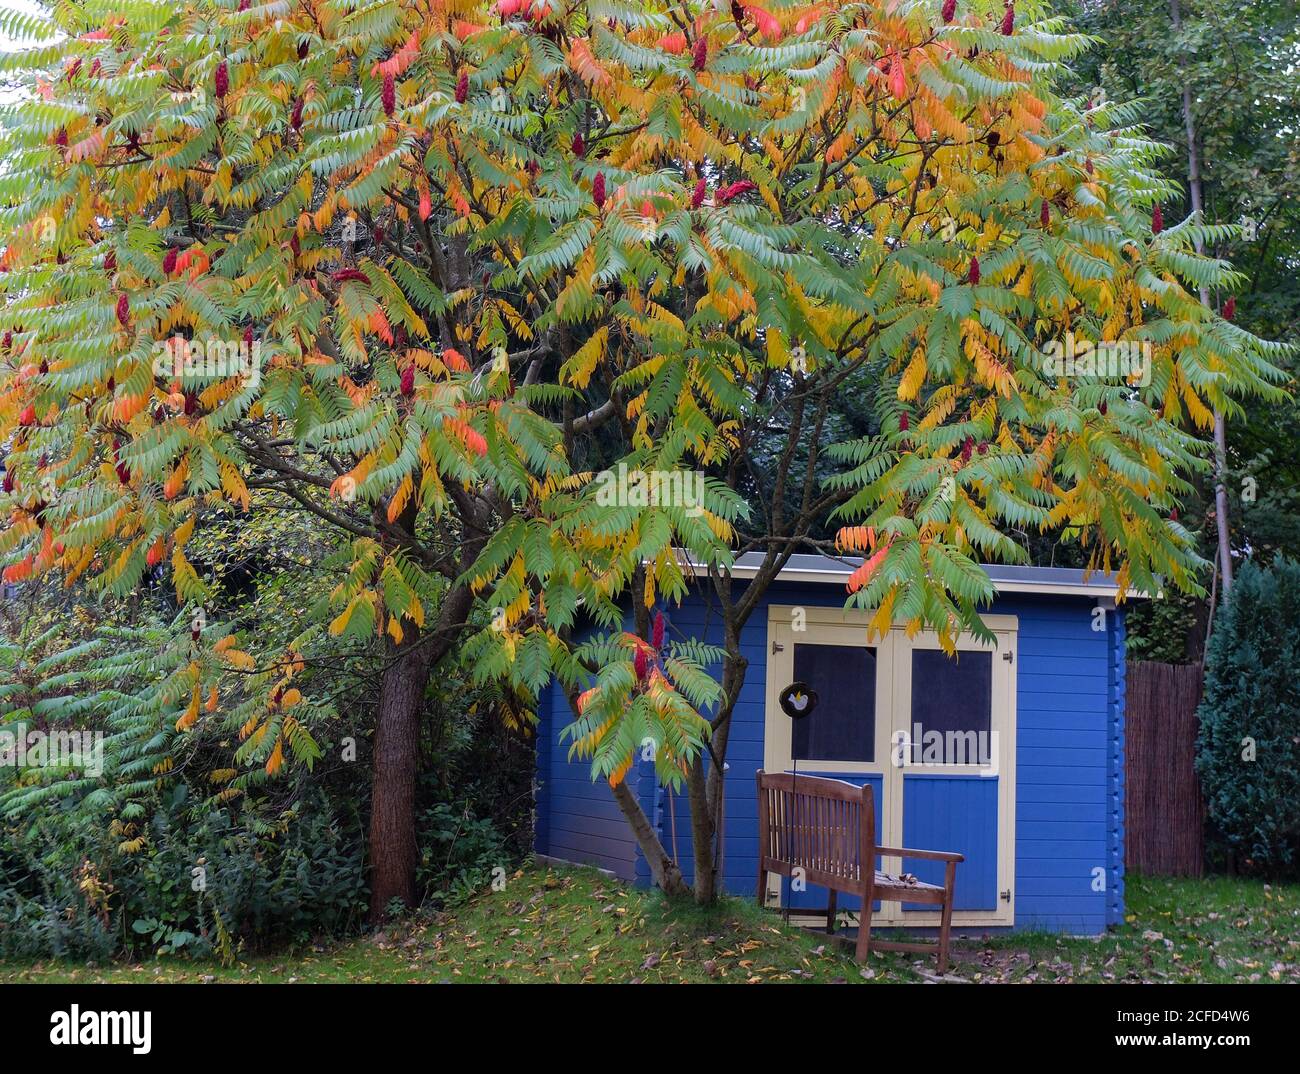 Vinegar tree (Rhus typhina) in front of the blue shed Stock Photo